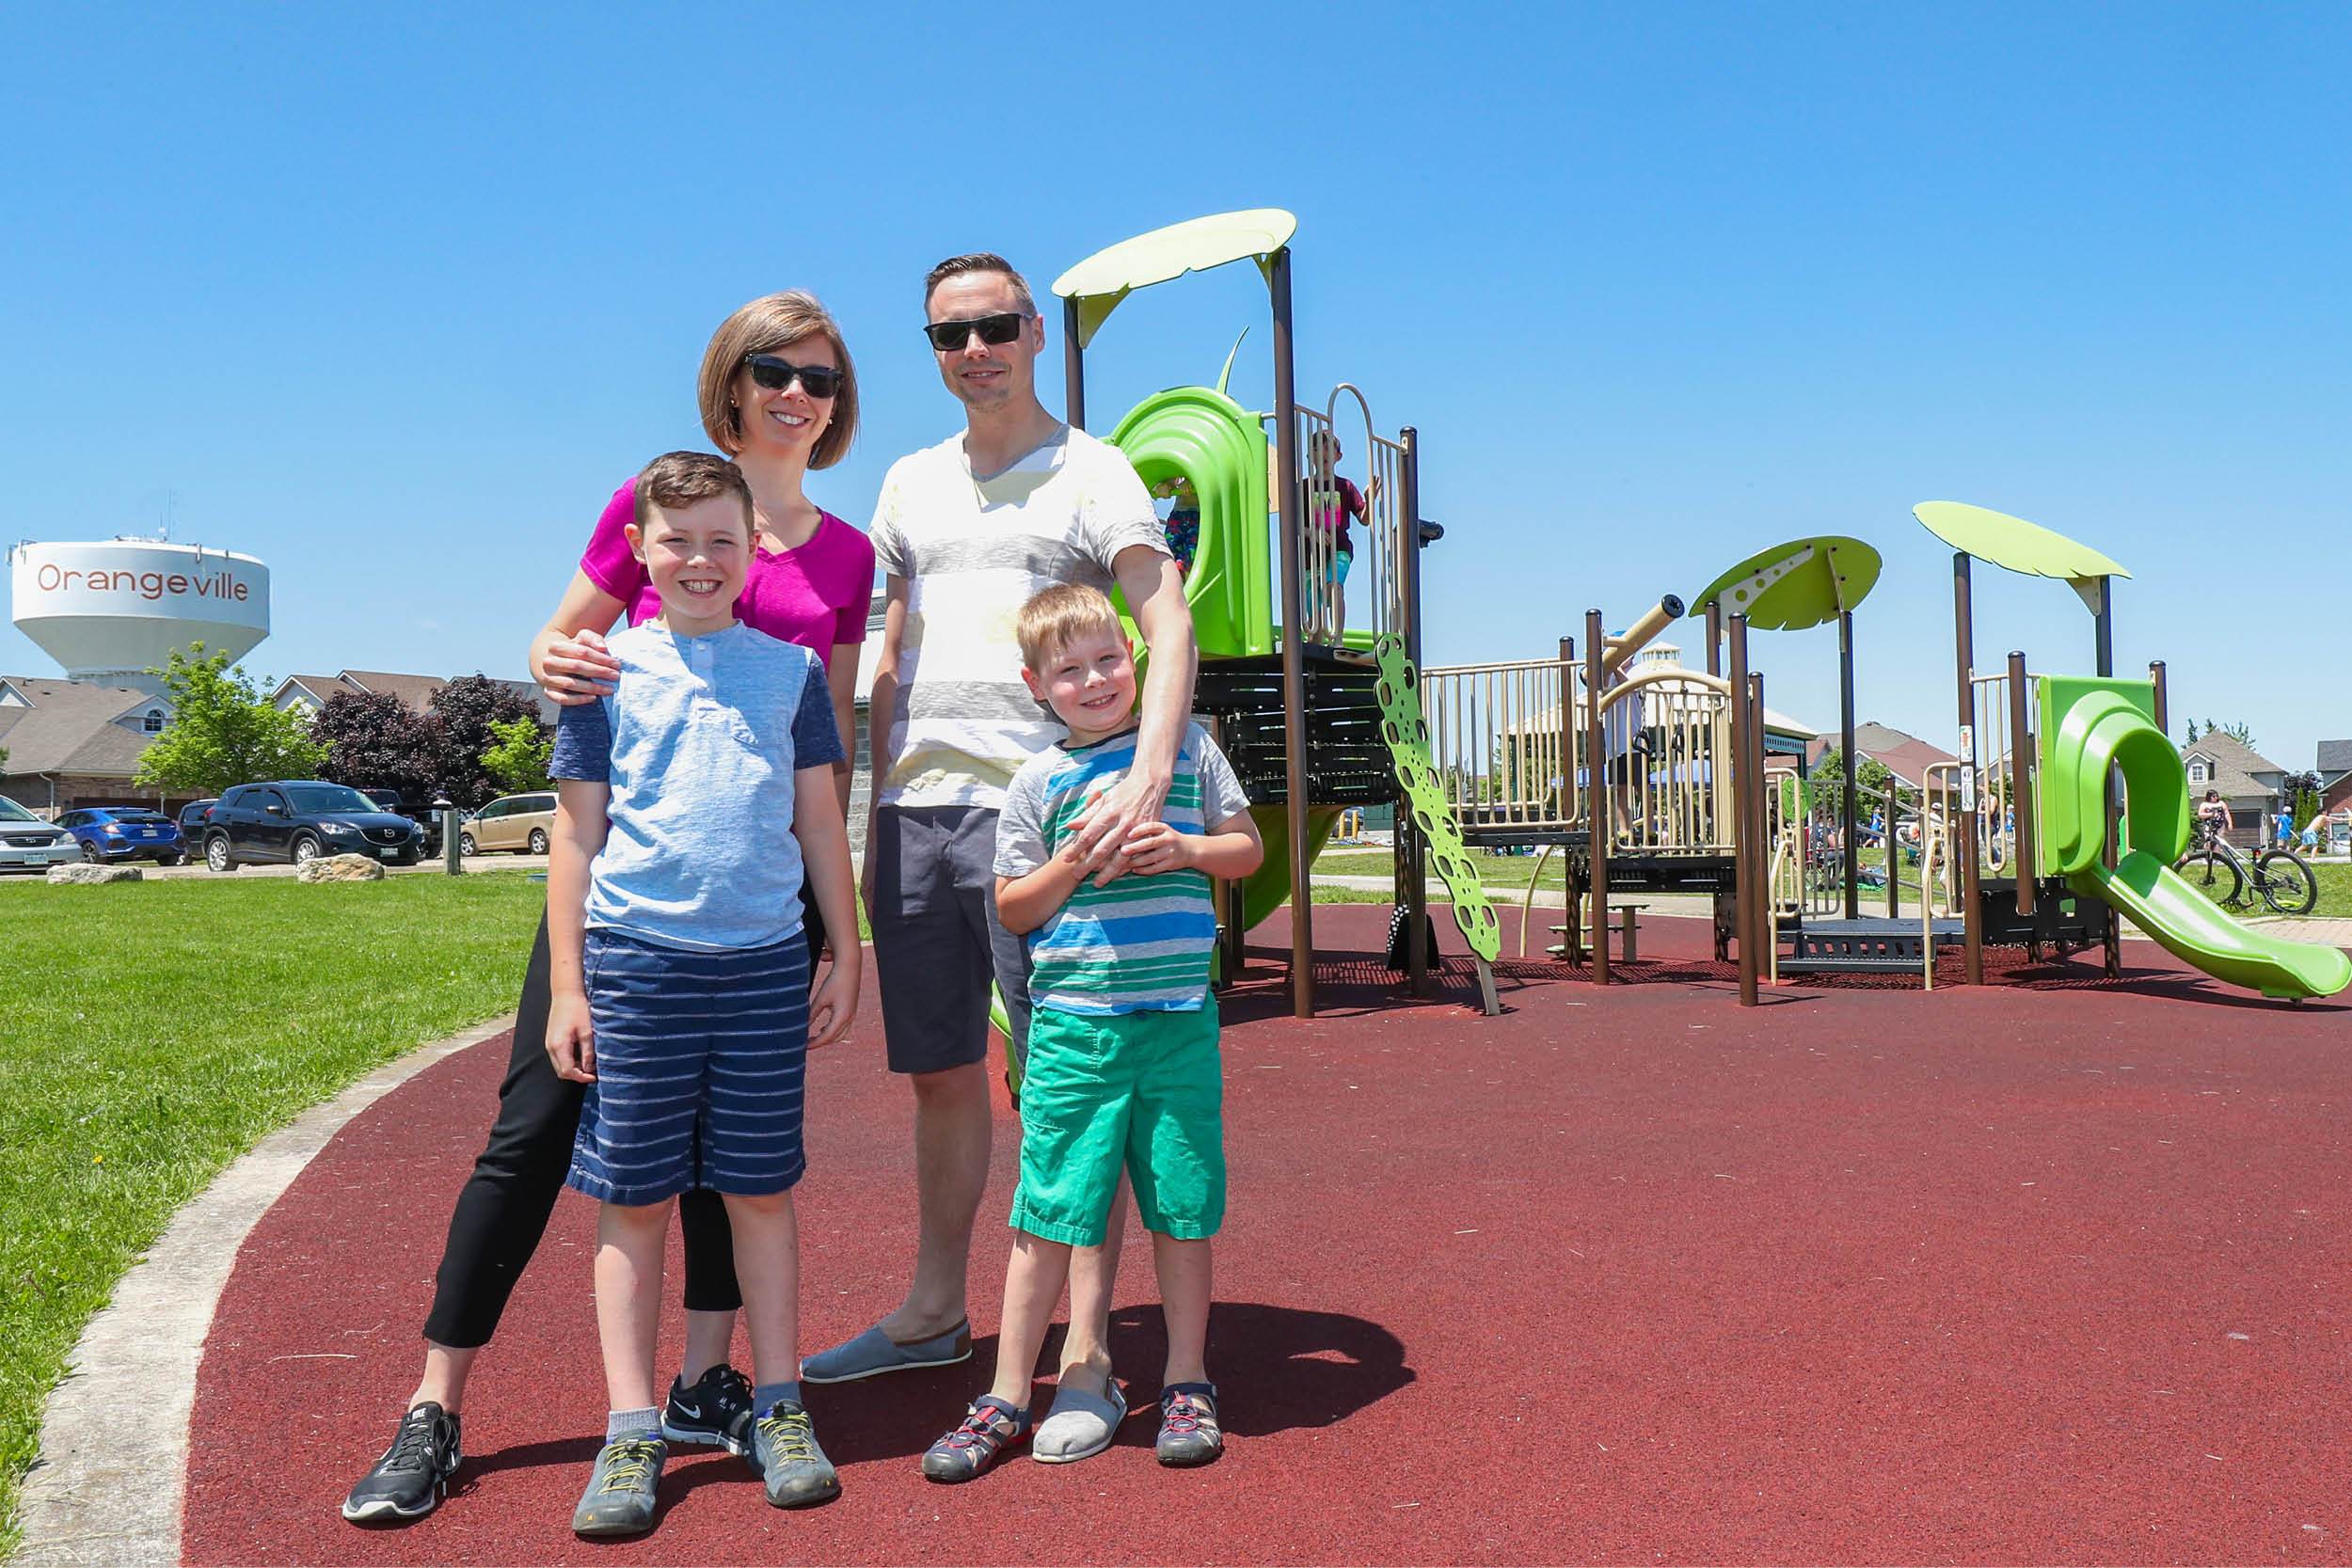 Family of four standing in playground